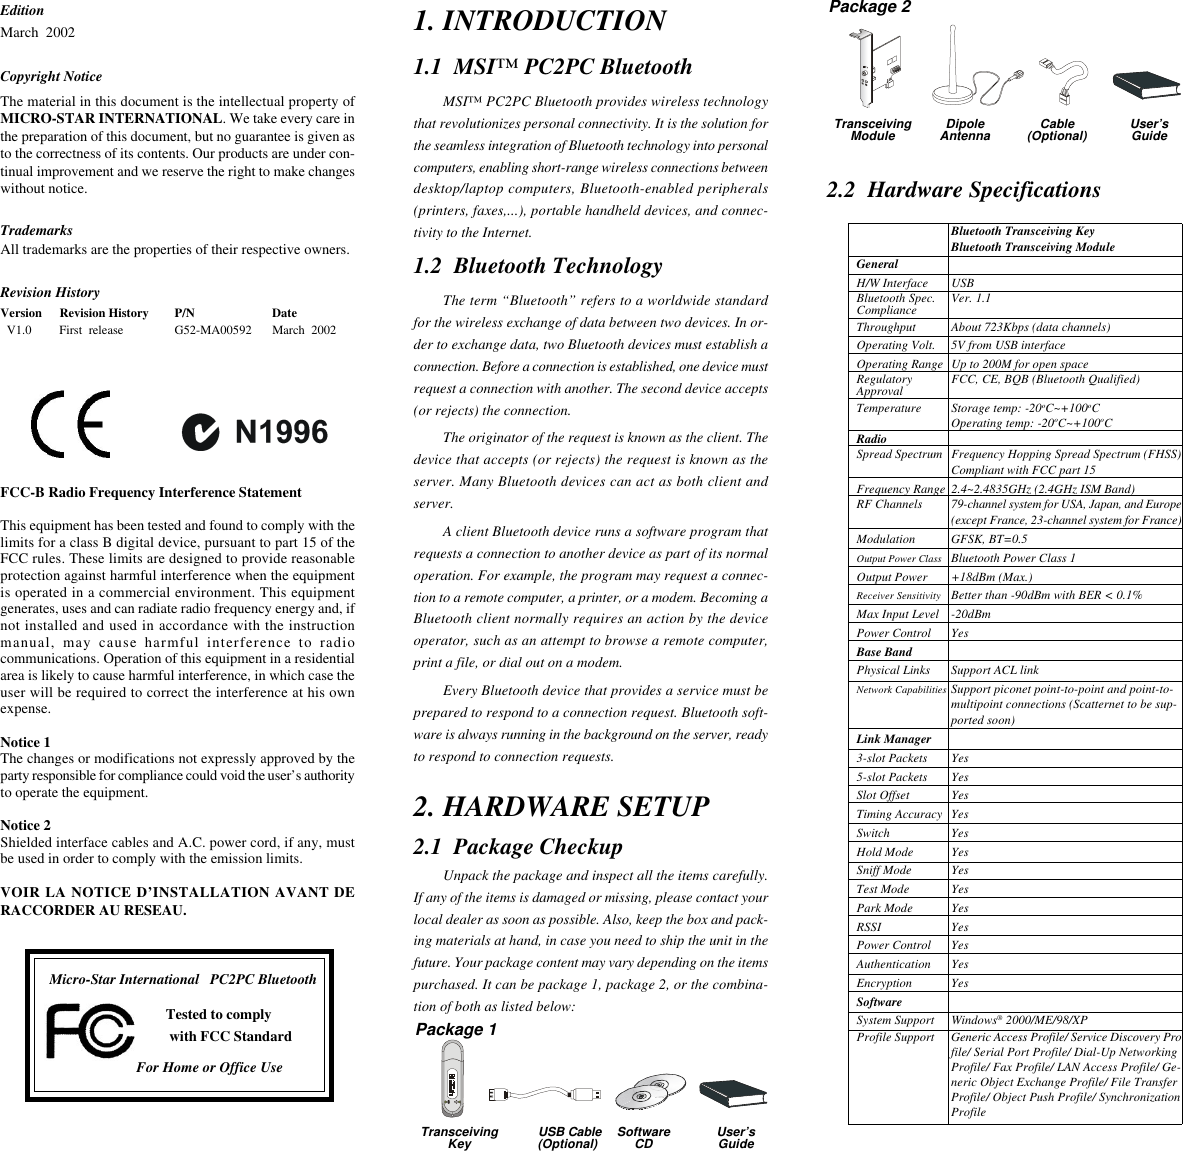 EditionMarch  2002Copyright NoticeThe material in this document is the intellectual property ofMICRO-STAR INTERNATIONAL. We take every care inthe preparation of this document, but no guarantee is given asto the correctness of its contents. Our products are under con-tinual improvement and we reserve the right to make changeswithout notice.TrademarksAll trademarks are the properties of their respective owners.Revision HistoryVersion Revision History P/N Date  V1.0 First  release G52-MA00592 March  2002FCC-B Radio Frequency Interference StatementThis equipment has been tested and found to comply with thelimits for a class B digital device, pursuant to part 15 of theFCC rules. These limits are designed to provide reasonableprotection against harmful interference when the equipmentis operated in a commercial environment. This equipmentgenerates, uses and can radiate radio frequency energy and, ifnot installed and used in accordance with the instructionmanual, may cause harmful interference to radiocommunications. Operation of this equipment in a residentialarea is likely to cause harmful interference, in which case theuser will be required to correct the interference at his ownexpense.Notice 1The changes or modifications not expressly approved by theparty responsible for compliance could void the user’s authorityto operate the equipment.Notice 2Shielded interface cables and A.C. power cord, if any, mustbe used in order to comply with the emission limits.VOIR LA NOTICE D’INSTALLATION AVANT DERACCORDER AU RESEAU.Micro-Star International   PC2PC BluetoothTested to comply with FCC StandardFor Home or Office Use2. HARDWARE SETUP2.1  Package CheckupUnpack the package and inspect all the items carefully.If any of the items is damaged or missing, please contact yourlocal dealer as soon as possible. Also, keep the box and pack-ing materials at hand, in case you need to ship the unit in thefuture. Your package content may vary depending on the itemspurchased. It can be package 1, package 2, or the combina-tion of both as listed below:1. INTRODUCTION1.1  MSI™ PC2PC BluetoothMSI™ PC2PC Bluetooth provides wireless technologythat revolutionizes personal connectivity. It is the solution forthe seamless integration of Bluetooth technology into personalcomputers, enabling short-range wireless connections betweendesktop/laptop computers, Bluetooth-enabled peripherals(printers, faxes,...), portable handheld devices, and connec-tivity to the Internet.1.2  Bluetooth TechnologyThe term “Bluetooth” refers to a worldwide standardfor the wireless exchange of data between two devices. In or-der to exchange data, two Bluetooth devices must establish aconnection. Before a connection is established, one device mustrequest a connection with another. The second device accepts(or rejects) the connection.The originator of the request is known as the client. Thedevice that accepts (or rejects) the request is known as theserver. Many Bluetooth devices can act as both client andserver.A client Bluetooth device runs a software program thatrequests a connection to another device as part of its normaloperation. For example, the program may request a connec-tion to a remote computer, a printer, or a modem. Becoming aBluetooth client normally requires an action by the deviceoperator, such as an attempt to browse a remote computer,print a file, or dial out on a modem.Every Bluetooth device that provides a service must beprepared to respond to a connection request. Bluetooth soft-ware is always running in the background on the server, readyto respond to connection requests.2.2  Hardware SpecificationsBluetooth Transceiving KeyBluetooth Transceiving ModuleGeneralH/W Interface USBBluetooth Spec. Ver. 1.1ComplianceThroughput About 723Kbps (data channels)Operating Volt. 5V from USB interfaceOperating Range Up to 200M for open spaceRegulatory FCC, CE, BQB (Bluetooth Qualified)ApprovalTemperature Storage temp: -20oC~+100oCOperating temp: -20oC~+100oCRadioSpread Spectrum Frequency Hopping Spread Spectrum (FHSS)Compliant with FCC part 15Frequency Range 2.4~2.4835GHz (2.4GHz ISM Band)RF Channels 79-channel system for USA, Japan, and Europe(except France, 23-channel system for France)Modulation GFSK, BT=0.5Output Power Class Bluetooth Power Class 1Output Power +18dBm (Max.)Receiver Sensitivity Better than -90dBm with BER &lt; 0.1%Max Input Level -20dBmPower Control YesBase BandPhysical Links Support ACL linkNetwork Capabilities Support piconet point-to-point and point-to-multipoint connections (Scatternet to be sup-ported soon)Link Manager3-slot Packets Yes5-slot Packets YesSlot Offset YesTiming Accuracy YesSwitch YesHold Mode YesSniff Mode YesTest Mode YesPark Mode YesRSSI YesPower Control YesAuthentication YesEncryption YesSoftwareSystem Support Windows® 2000/ME/98/XPProfile Support Generic Access Profile/ Service Discovery Profile/ Serial Port Profile/ Dial-Up NetworkingProfile/ Fax Profile/ LAN Access Profile/ Ge-neric Object Exchange Profile/ File TransferProfile/ Object Push Profile/ SynchronizationProfilePackage 1Package 2TransceivingModule DipoleAntenna Cable(Optional) User’sGuideTransceivingKey USB Cable (Optional) SoftwareCD User’sGuide